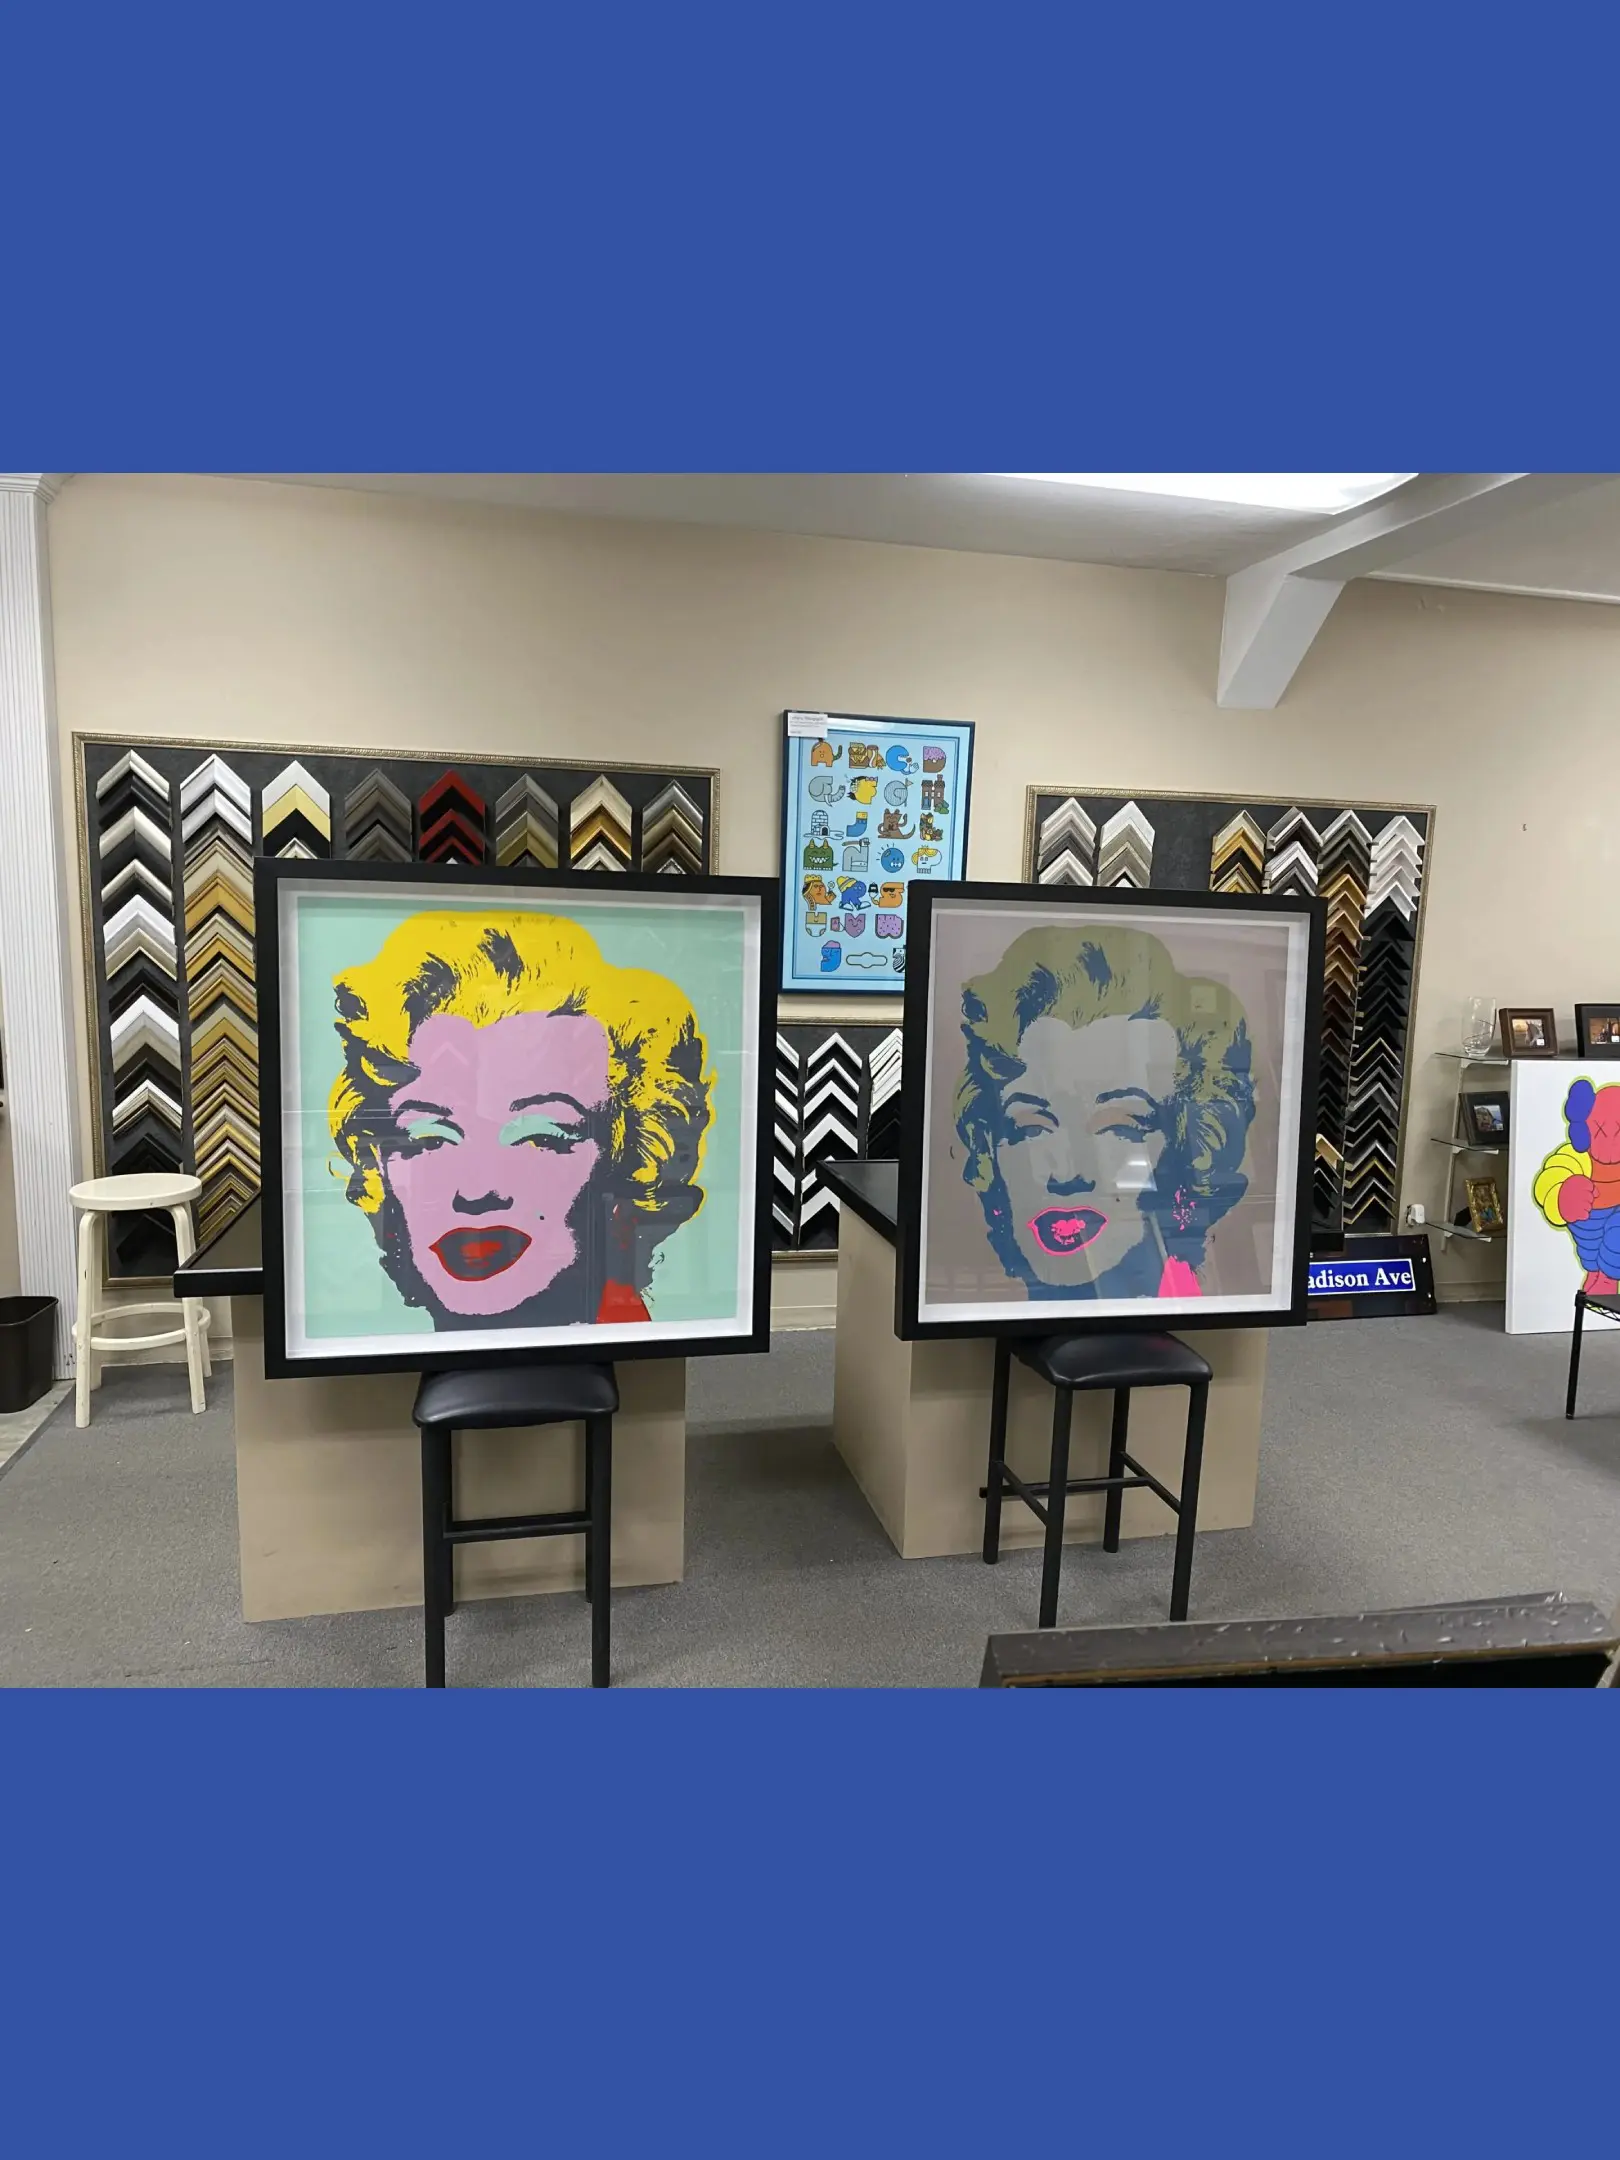 Two paintings of marilyn monroe are displayed in a room.